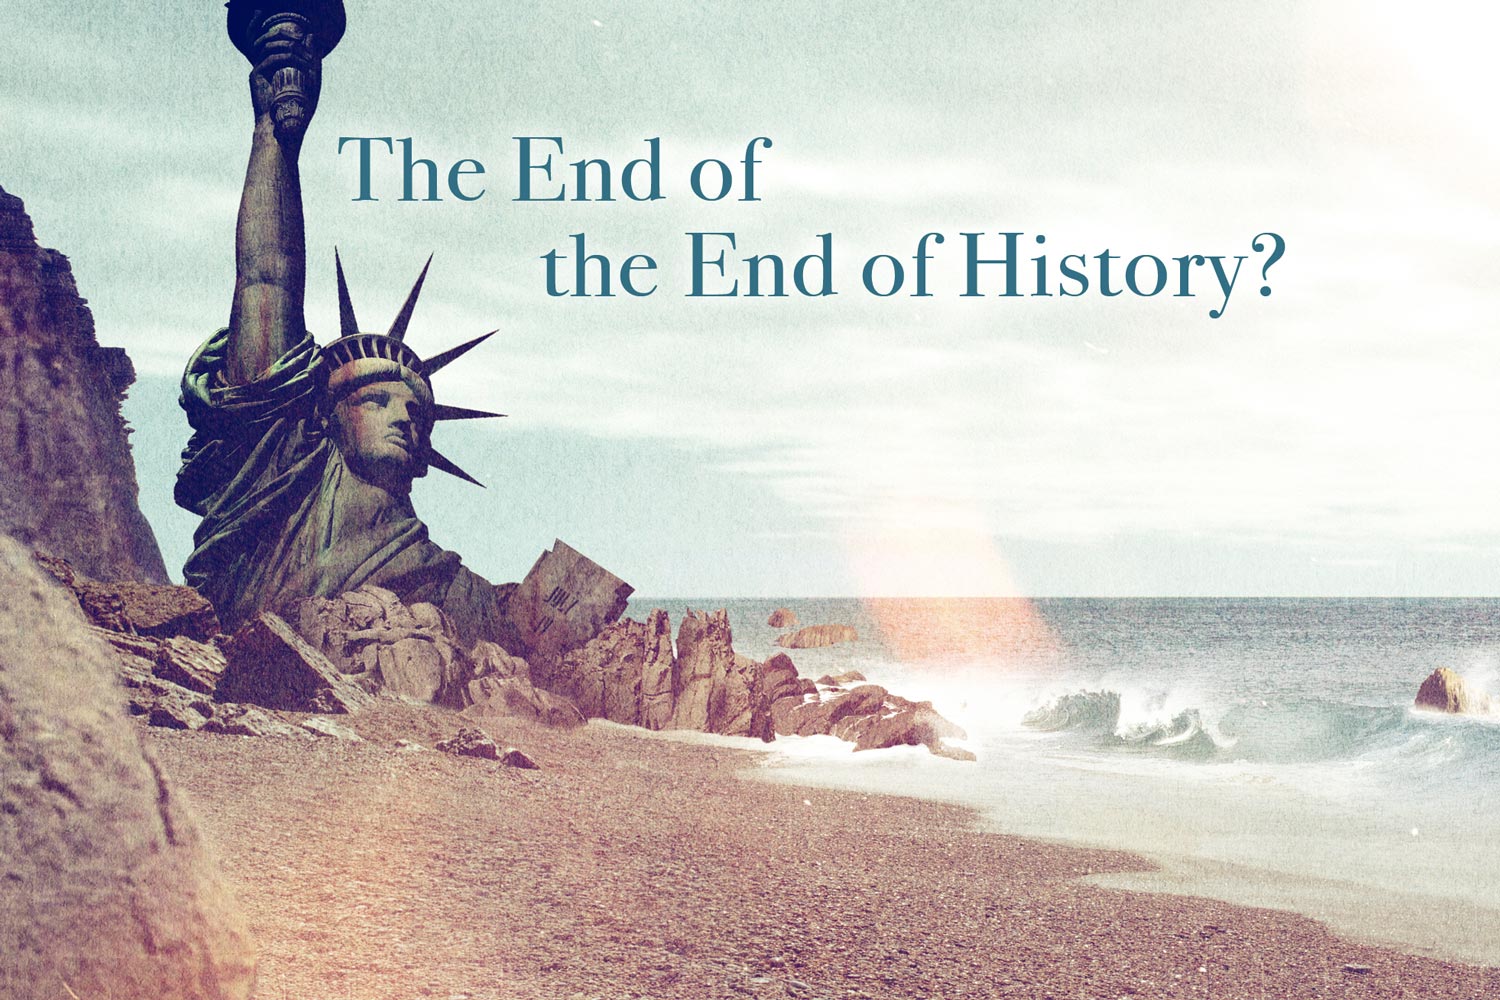 text reads: The End of the End of History?